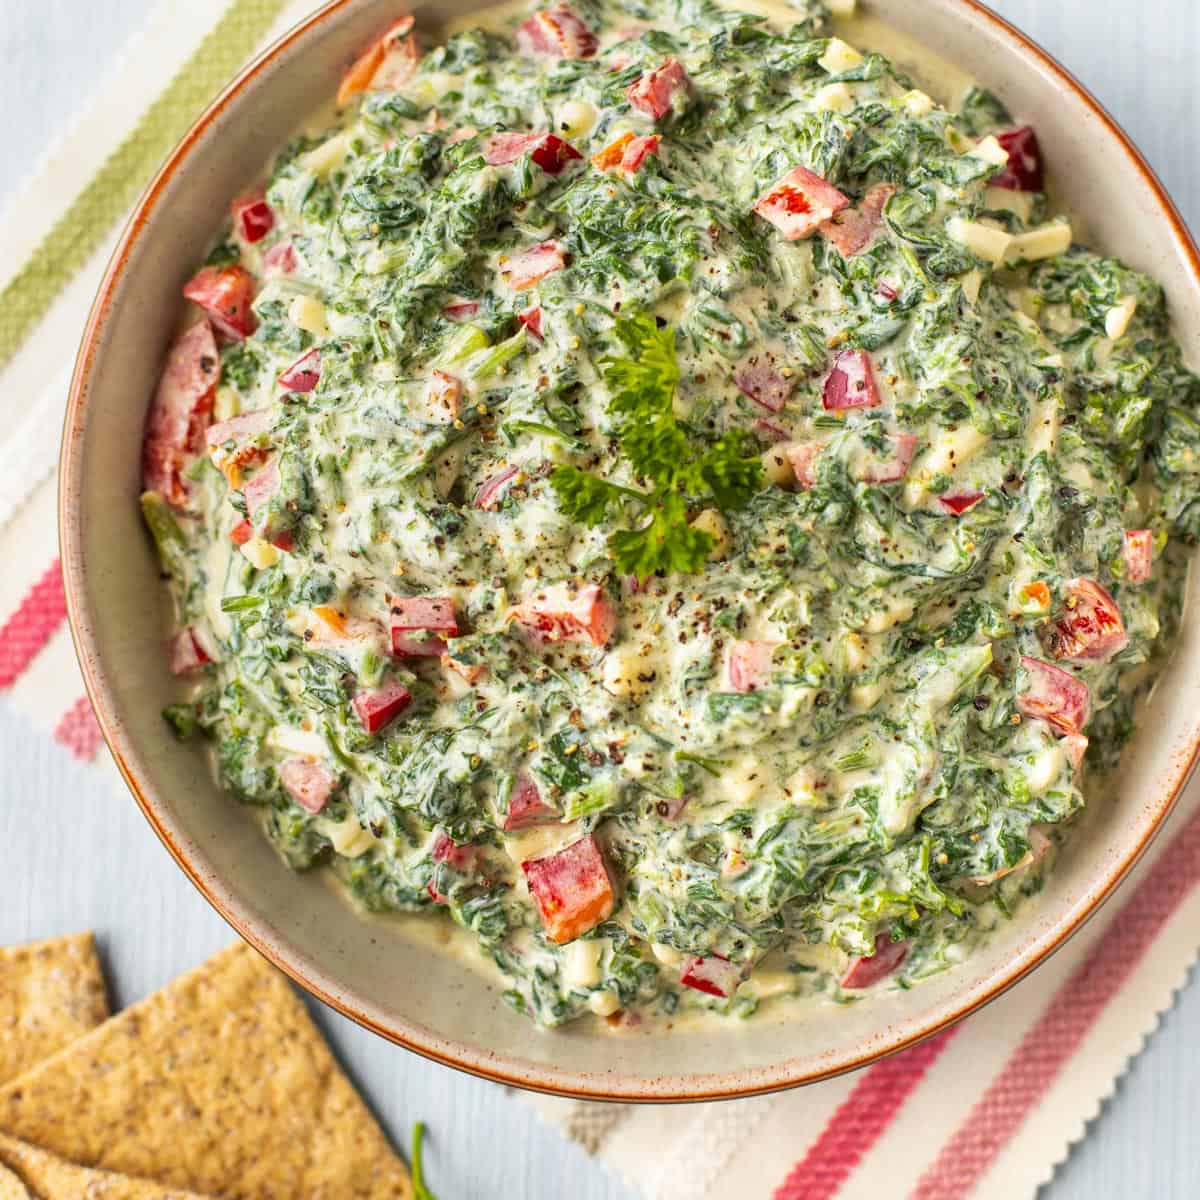 Creamy spinach dip in a bowl.